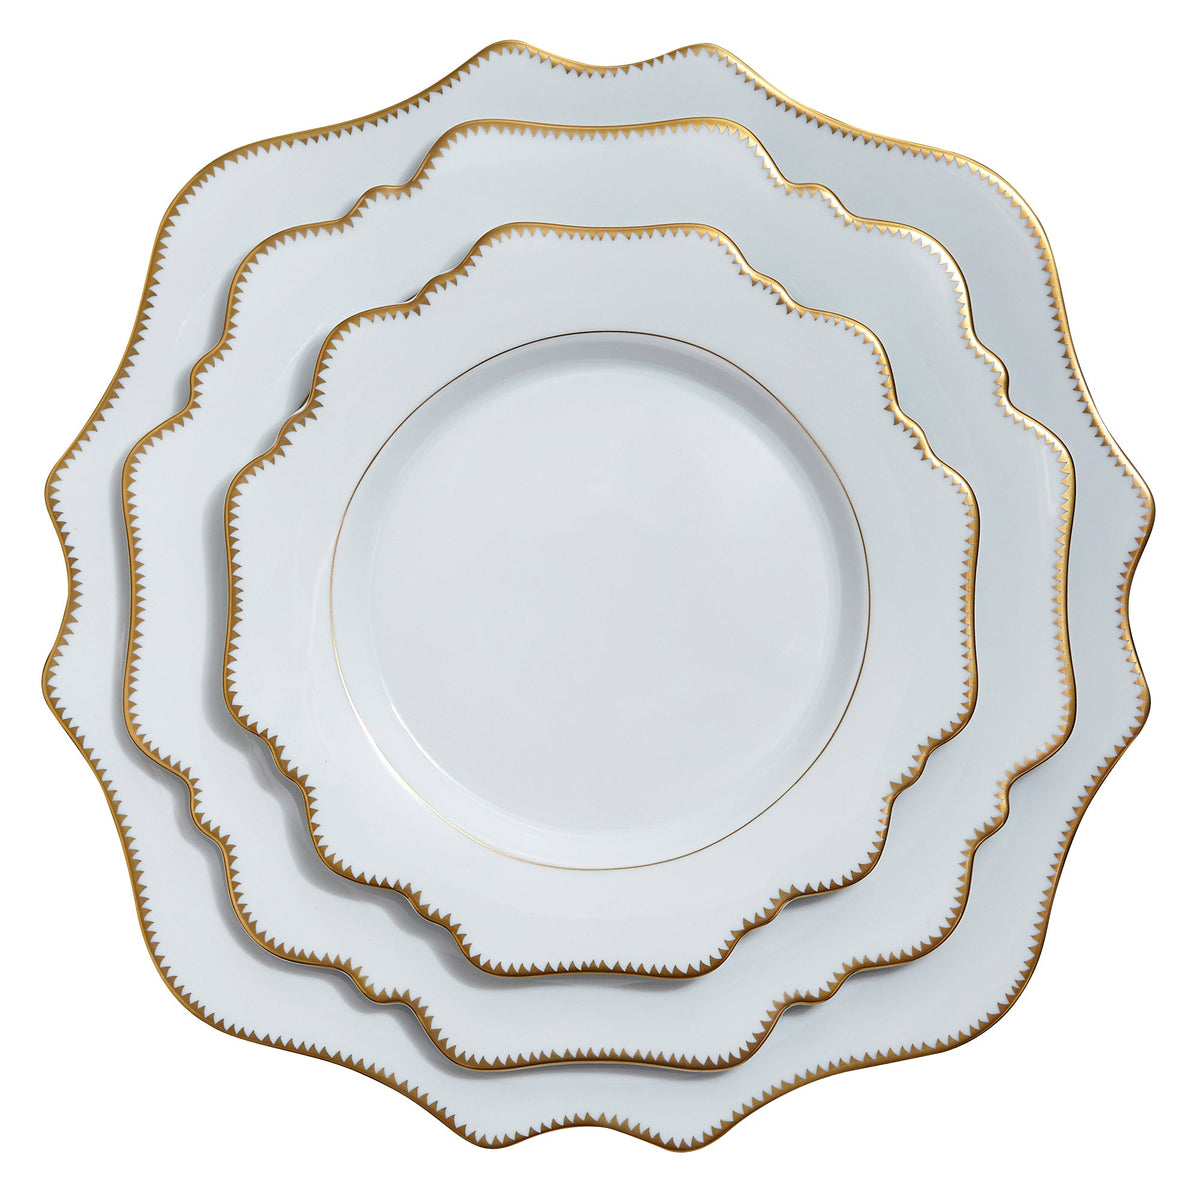 Simply Anna Antique Charger Plate